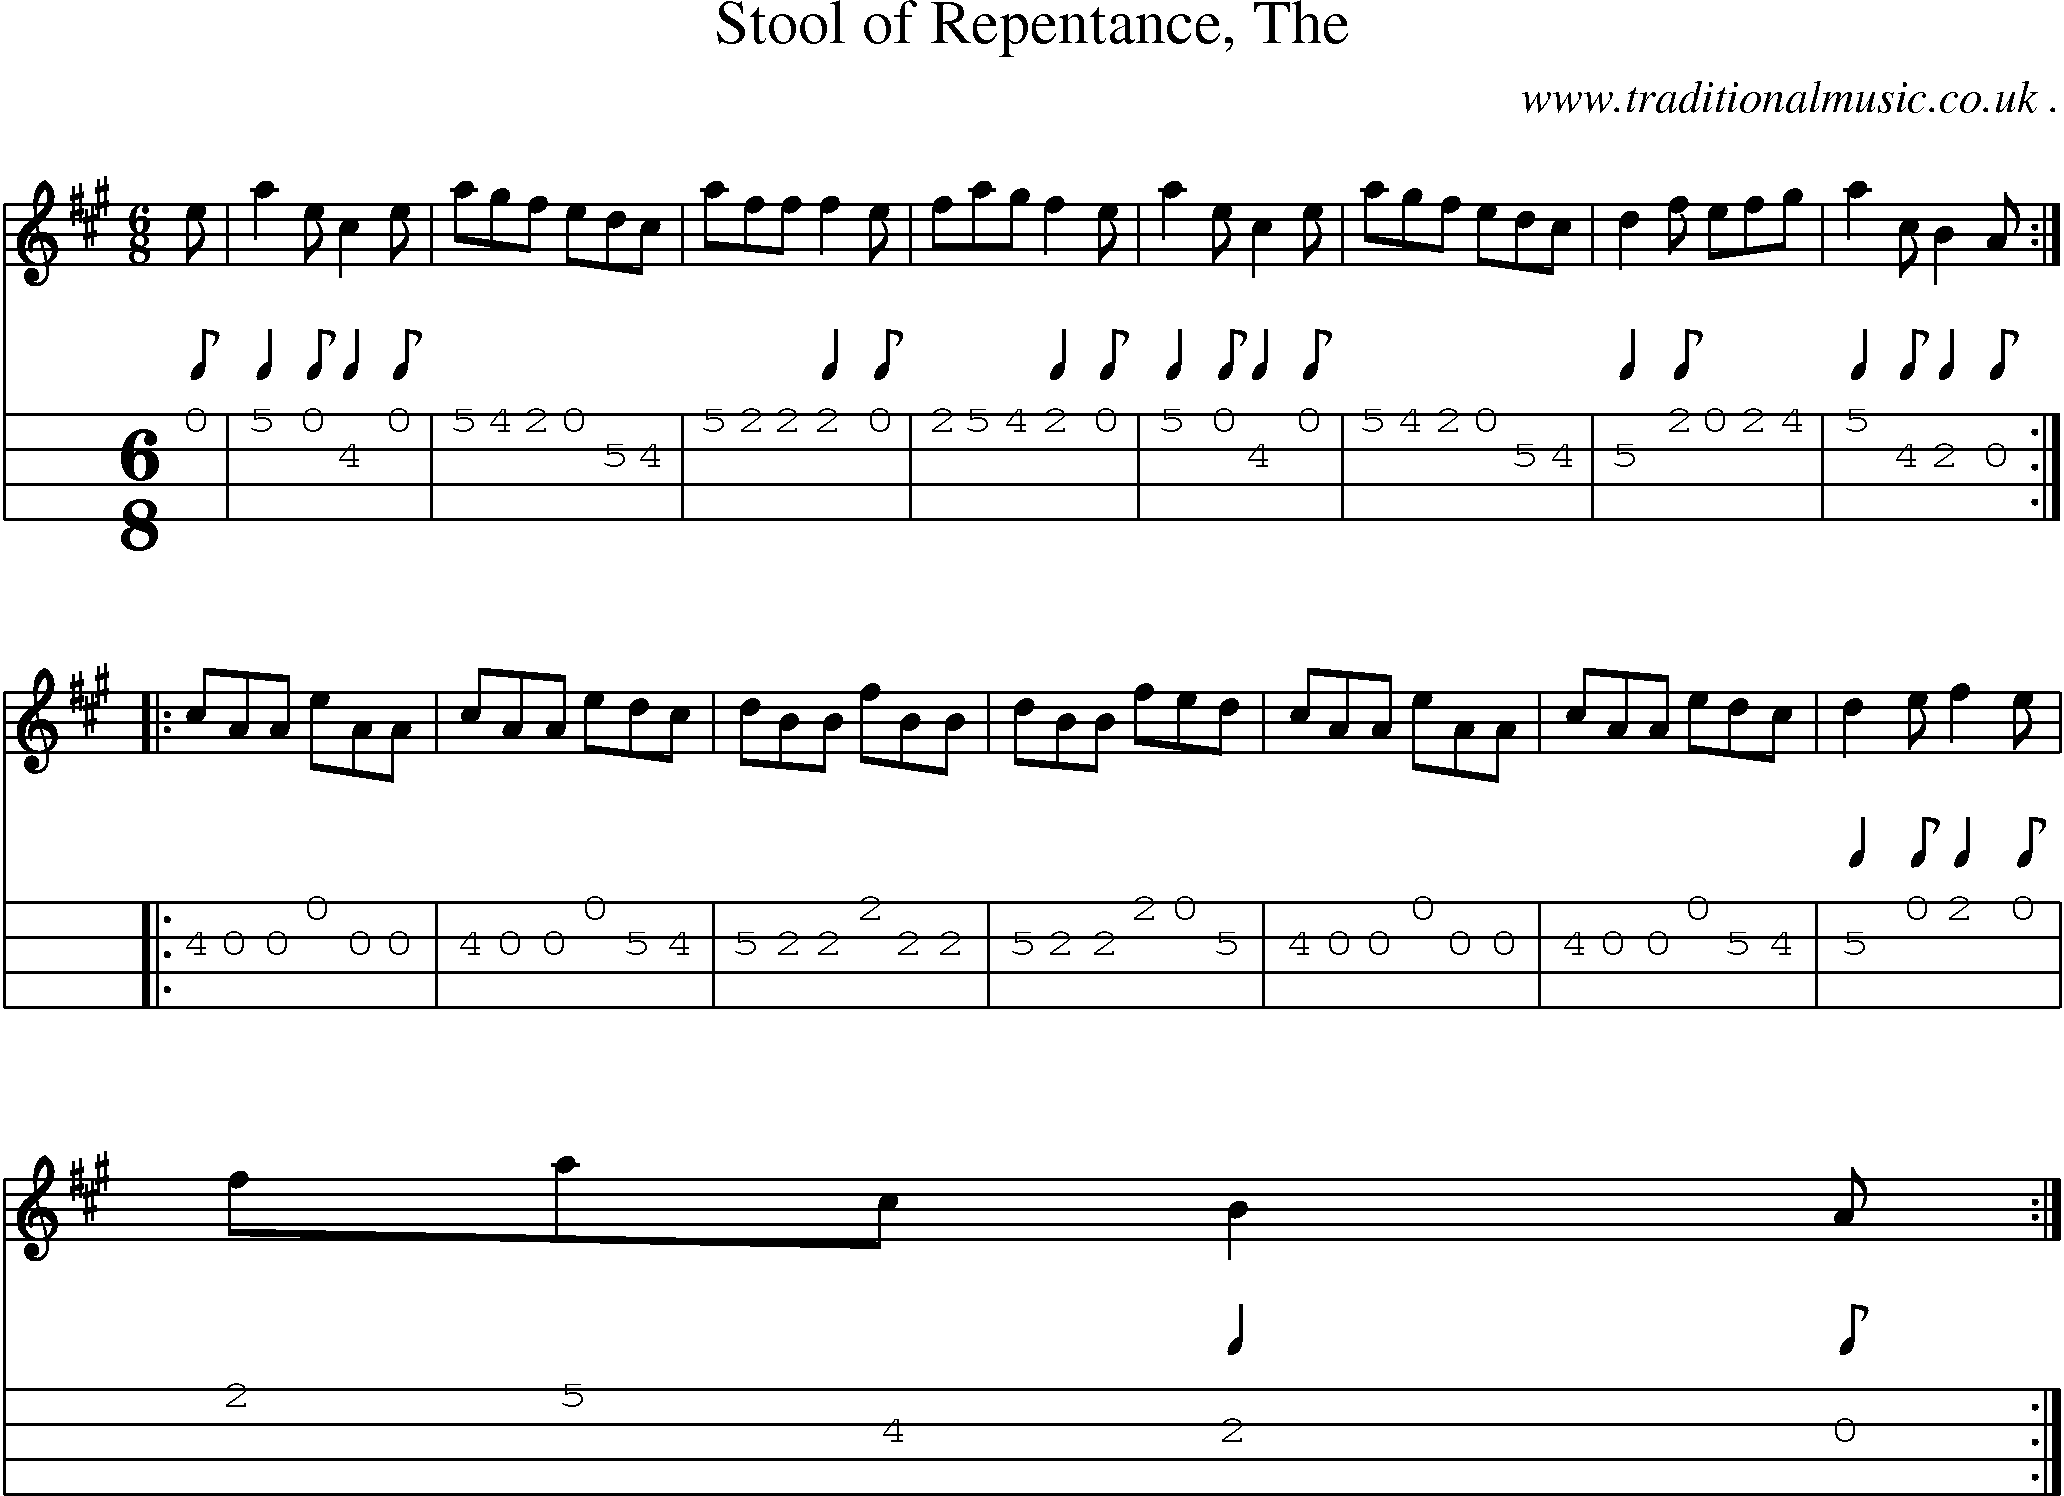 Sheet-music  score, Chords and Mandolin Tabs for Stool Of Repentance The